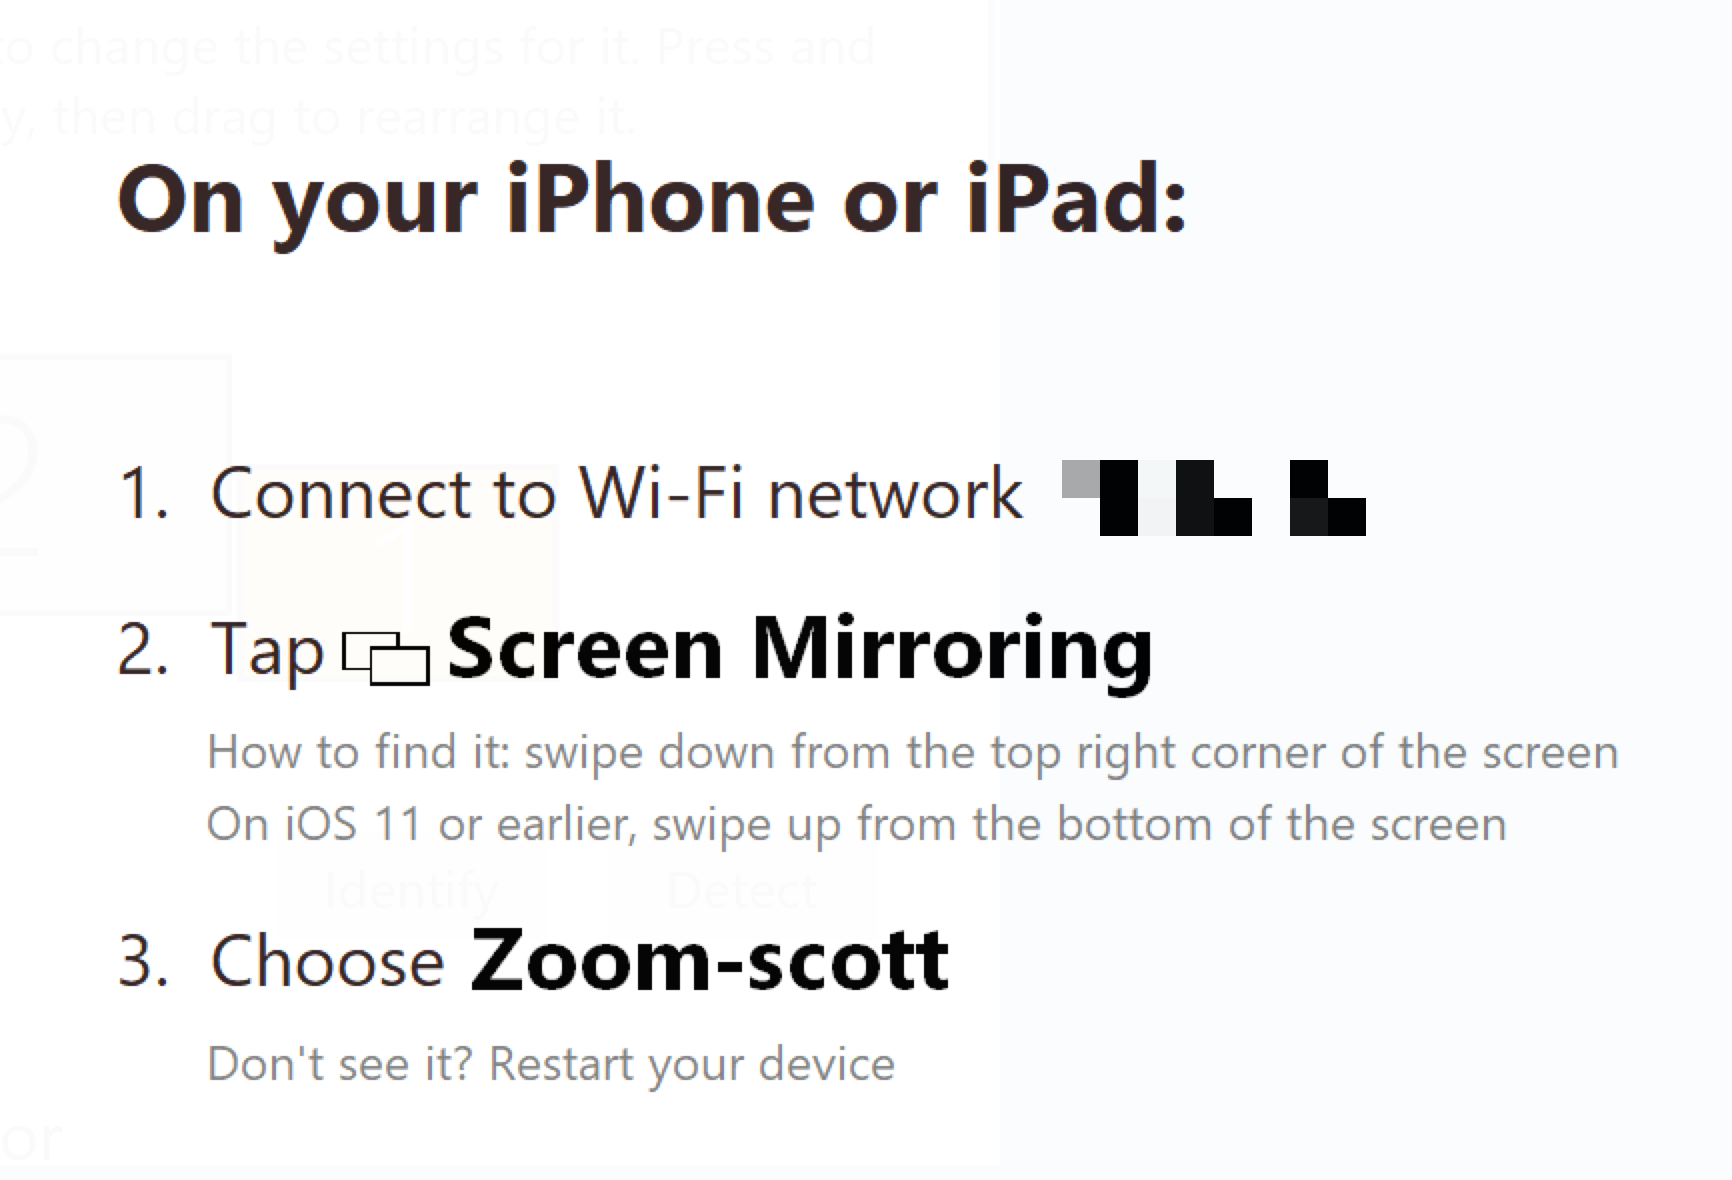 Instructions: On your iPhone or iPad: 1. Connect to Wi-Fi network. 2 Tap Screen Mirroring. (How to find it: swipe down from the top right corner of the screen. On iOS11 or earlier, swipe up from the bottom of the screen.)3. Choose Zoom-scott. (Don't see it? Restart your Device.)